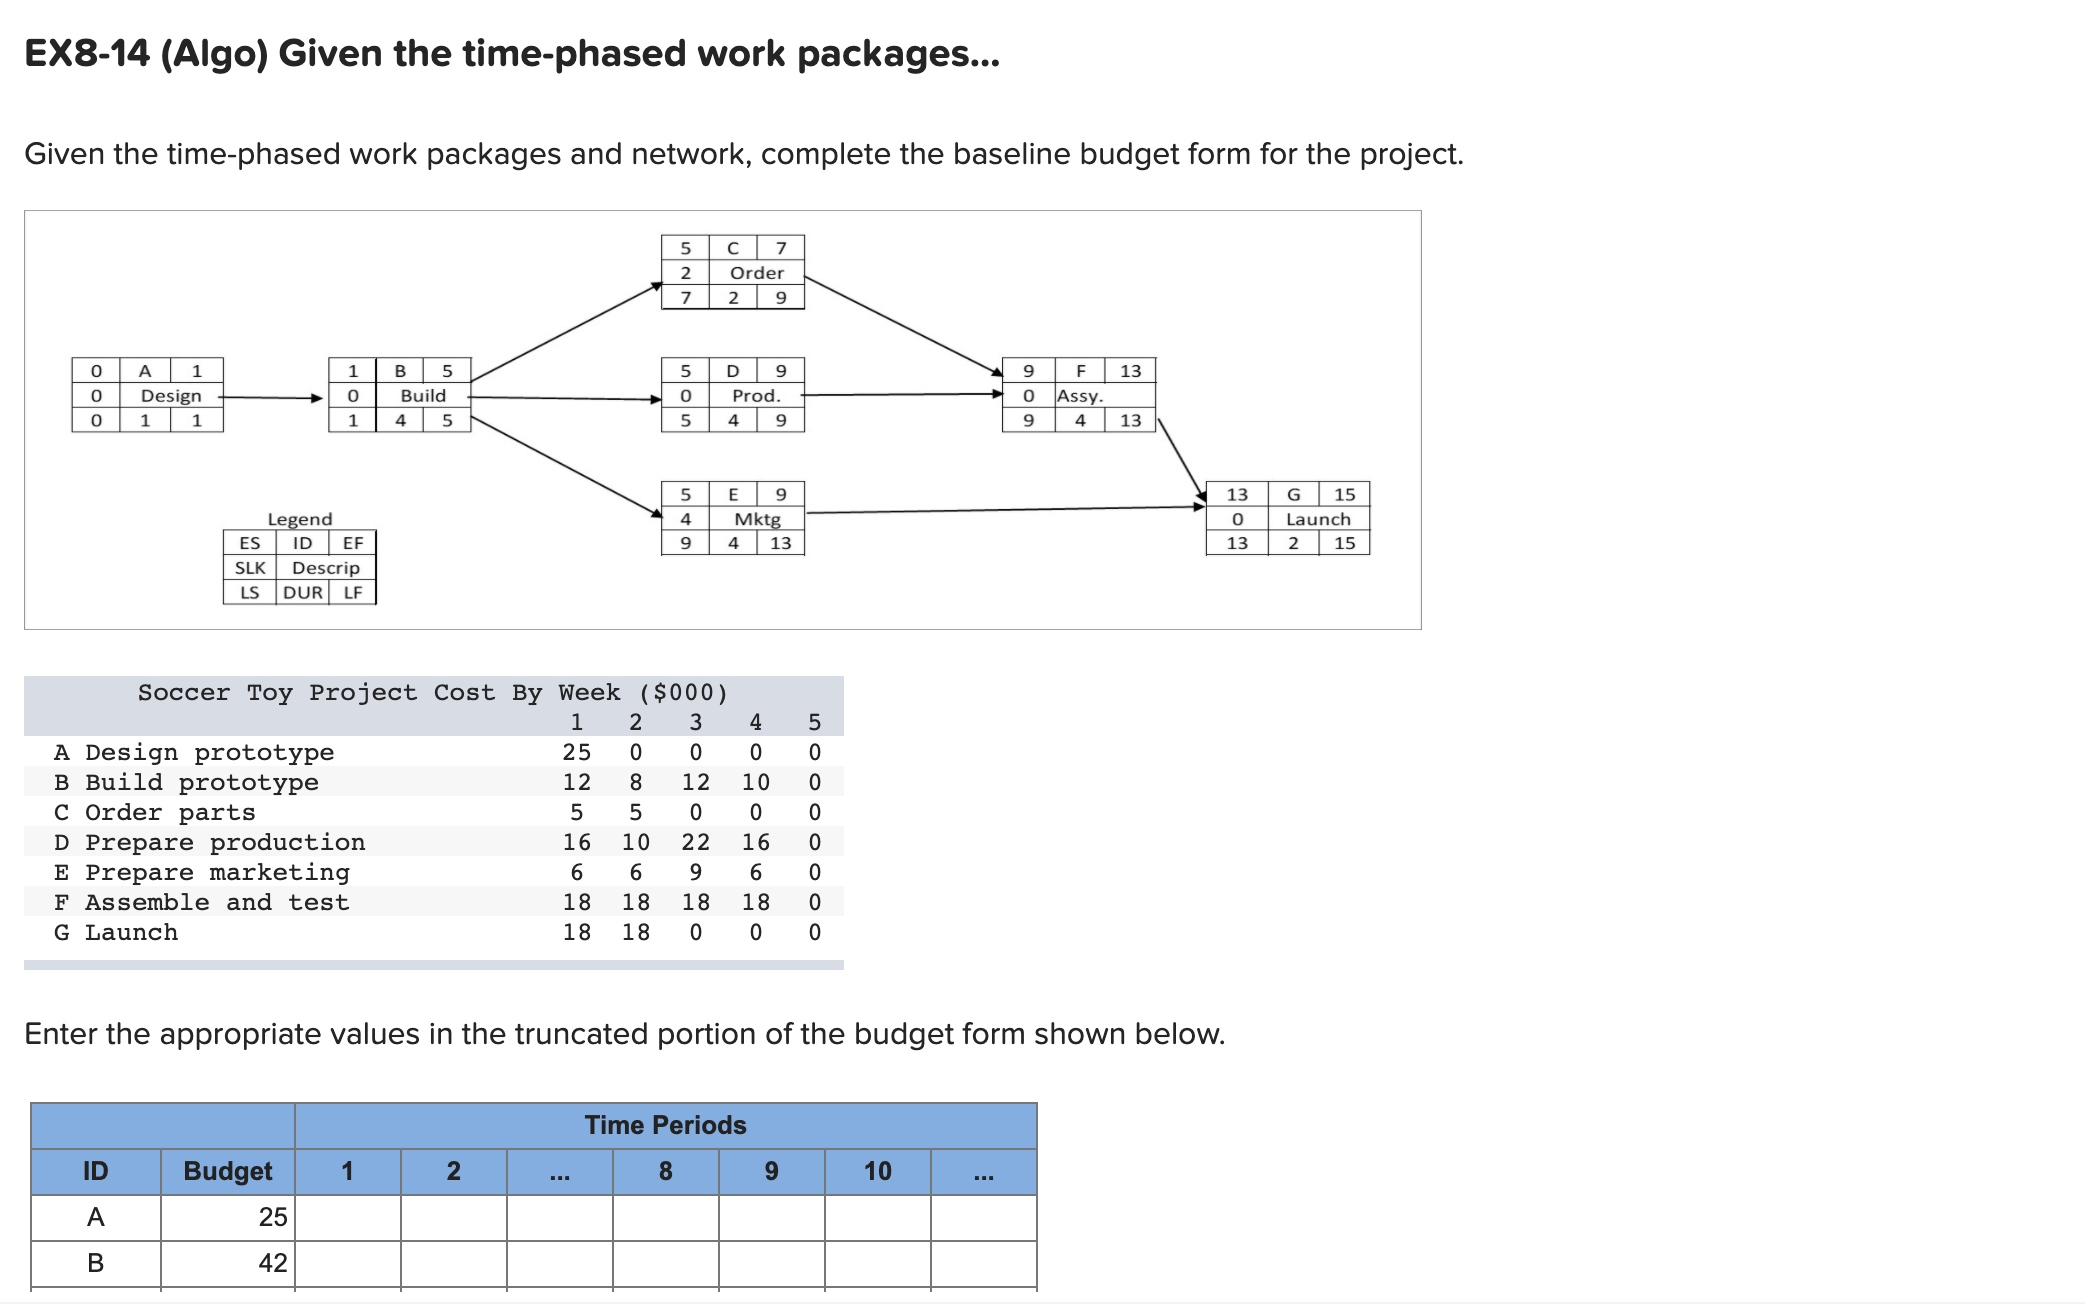 Solved EX8-14 (Algo) Given the time-phased work packages 